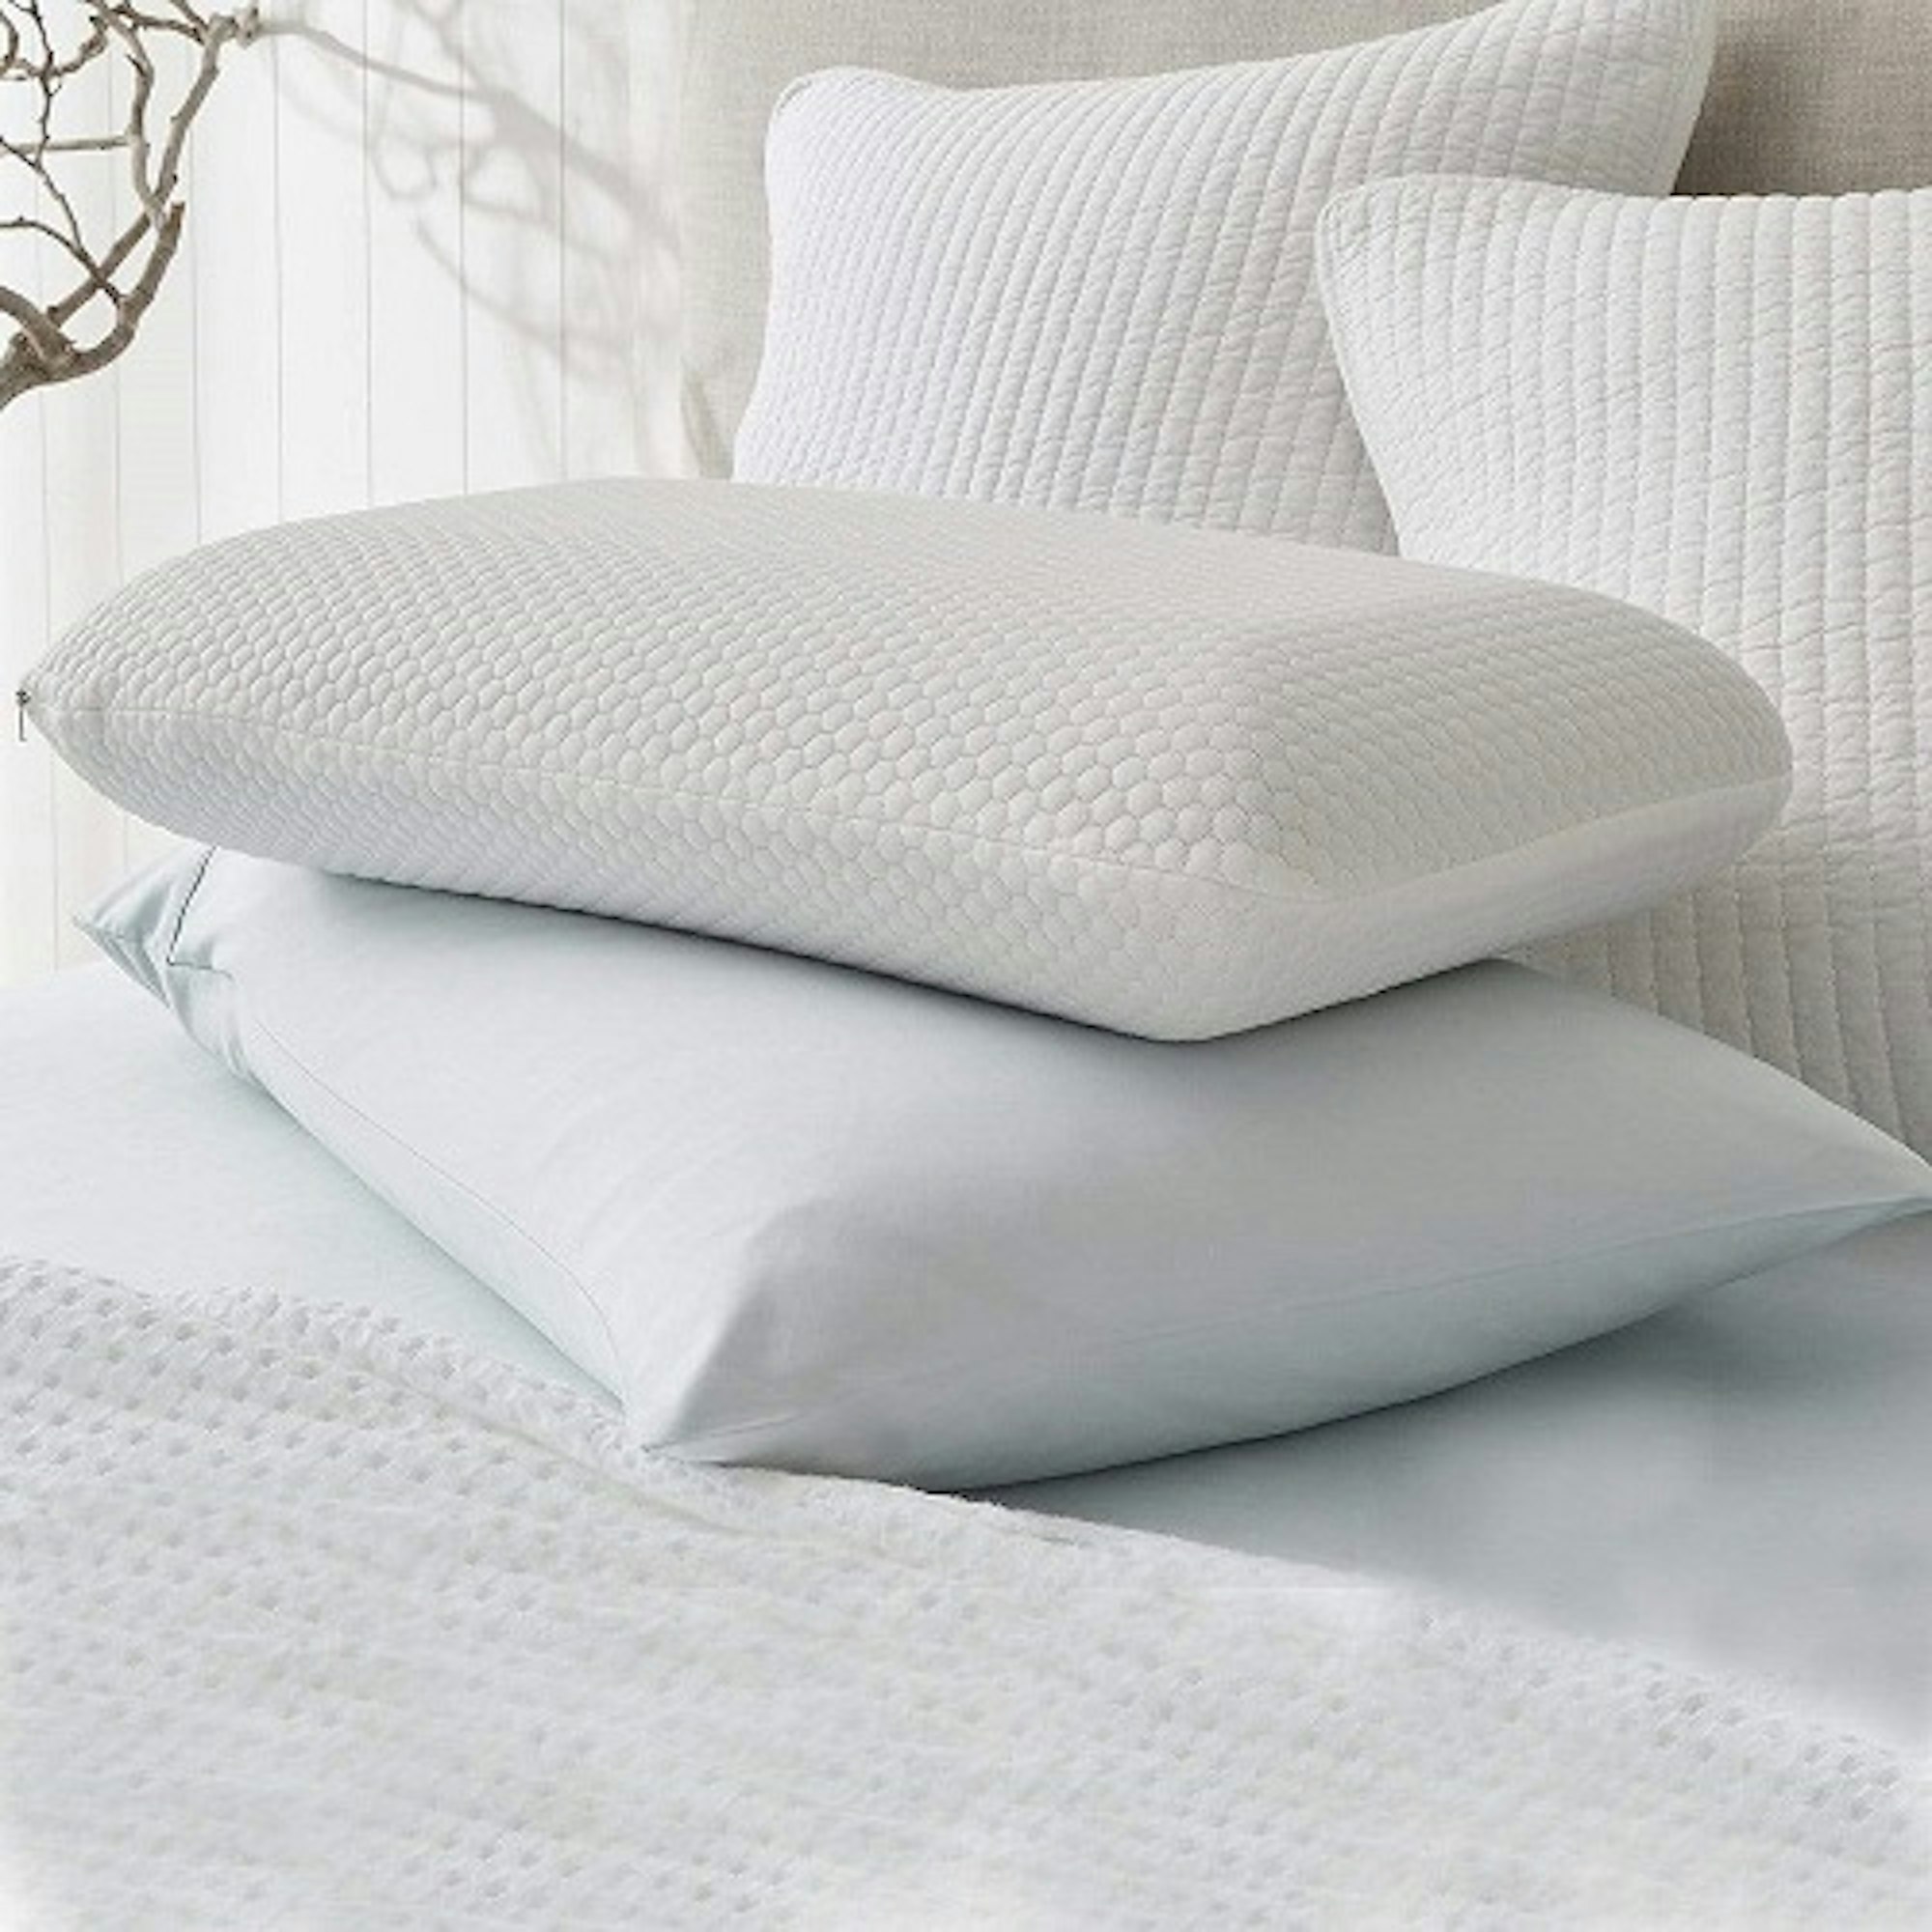 Bedroom pillows stacked on top of a bed